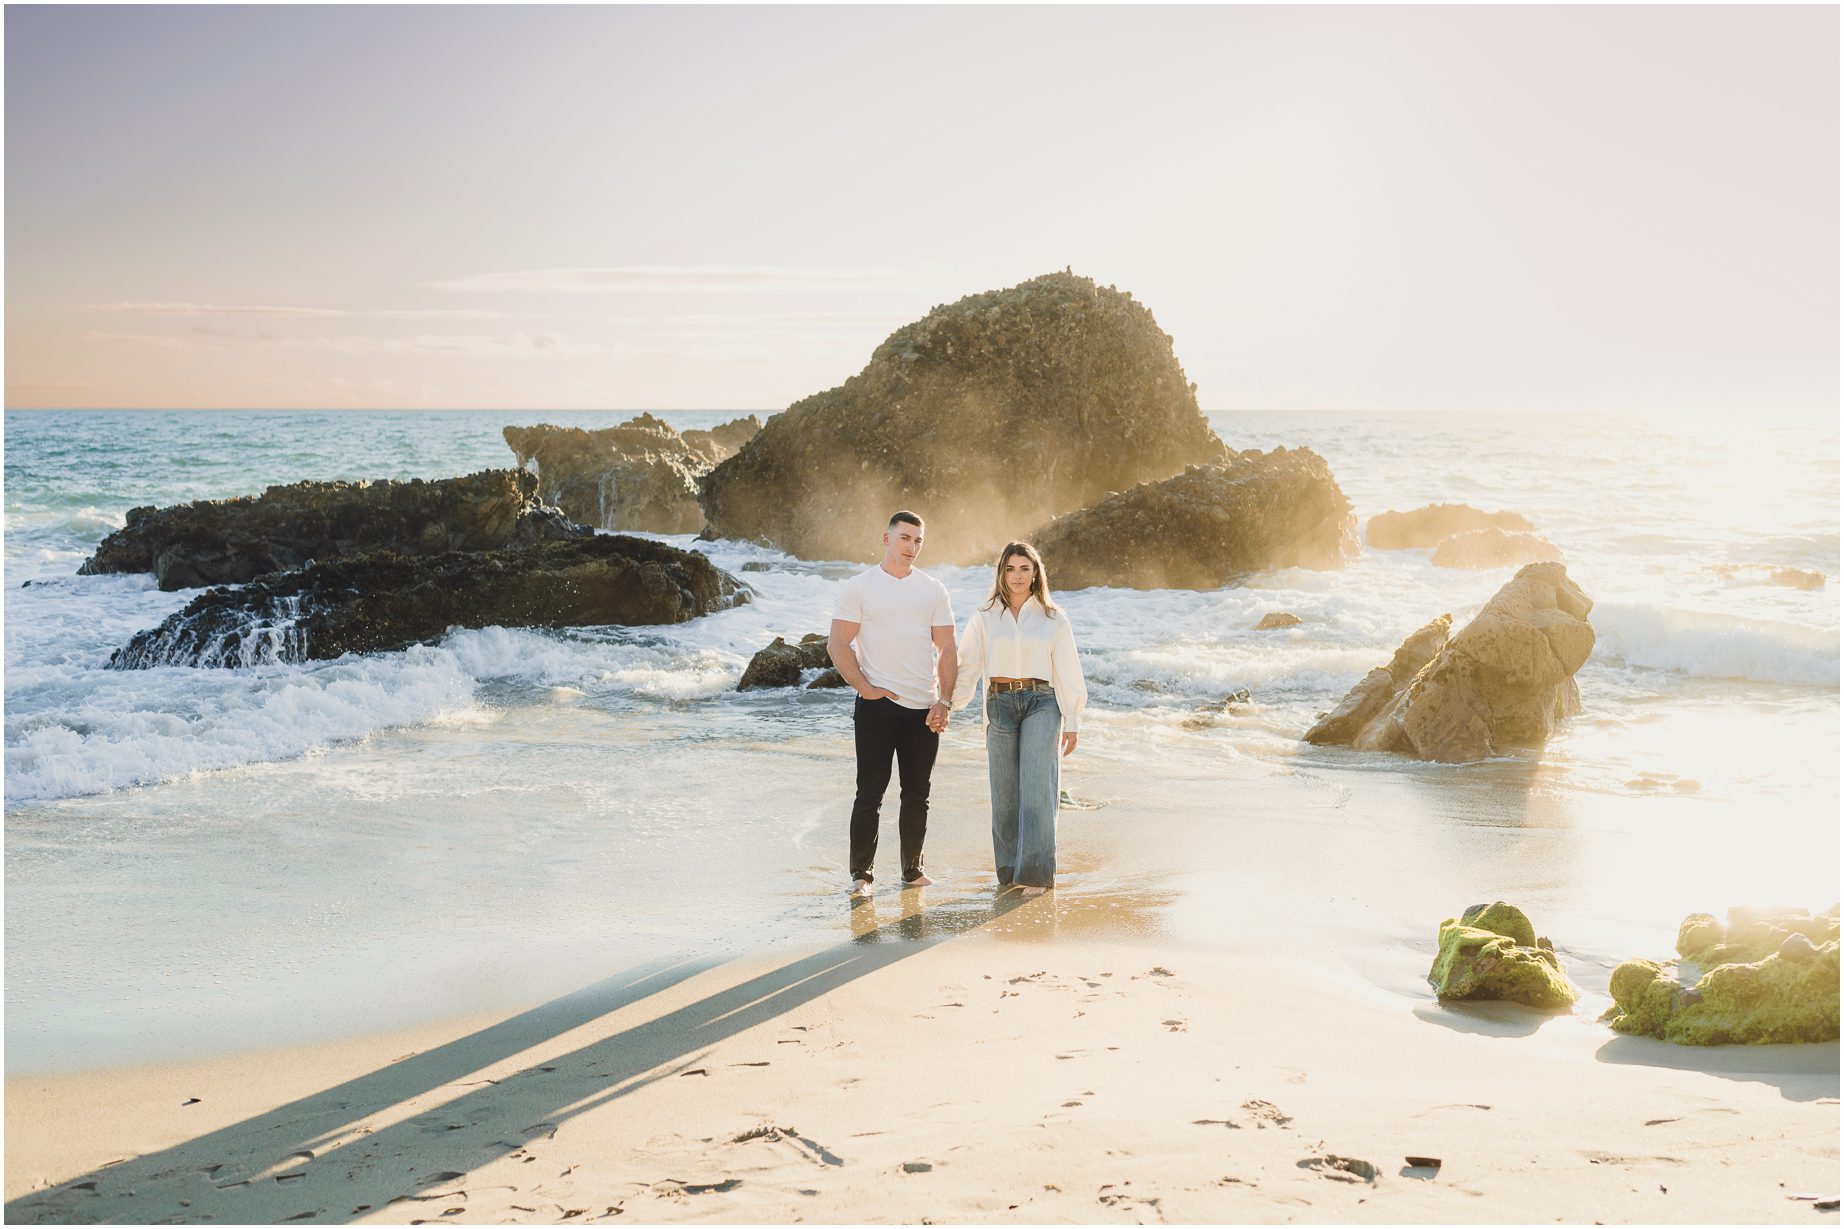 Kendal & Bruce pose at woods cove in Laguna Beach, in front of rocky outcroppings during their Laguna Beach engagement session